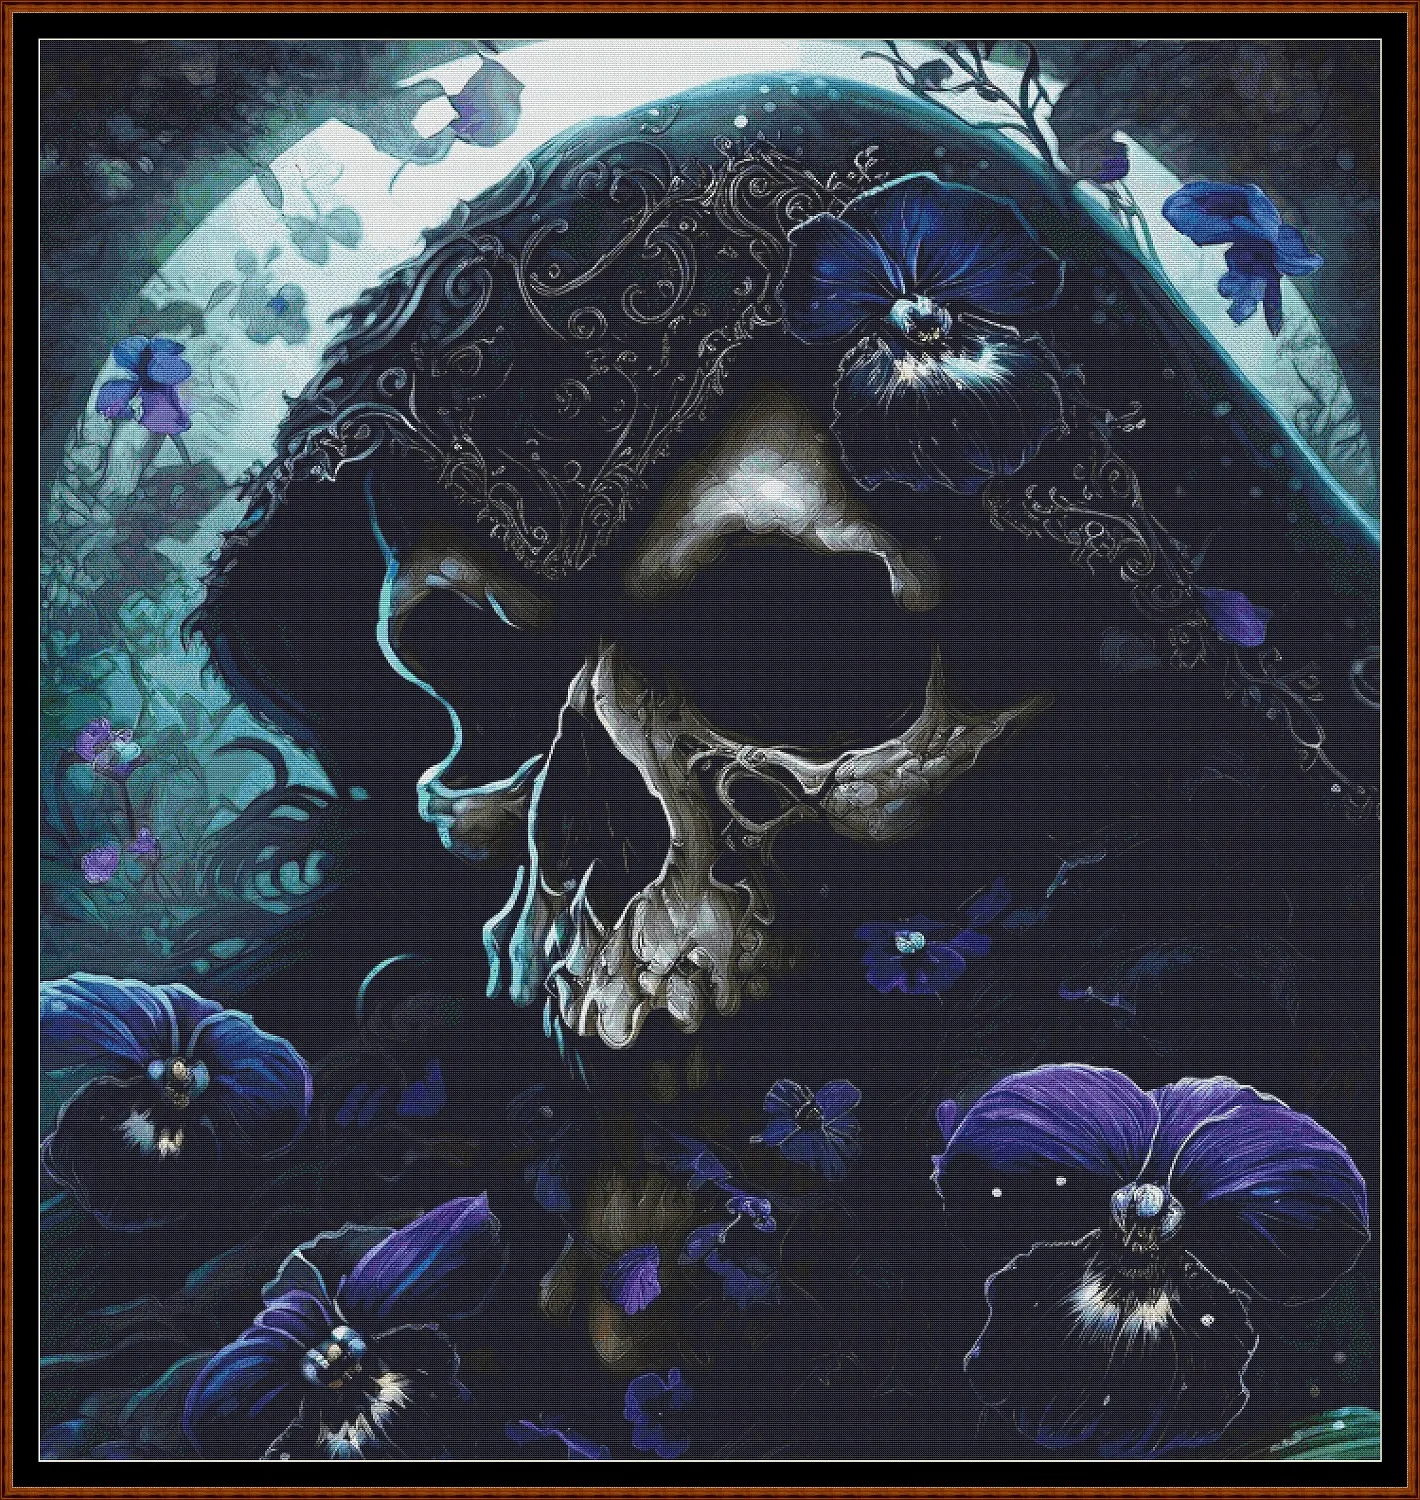 Iris Reaper grim reaper death patterns are expertly created from art by Gismi under Public Domain CC0 license